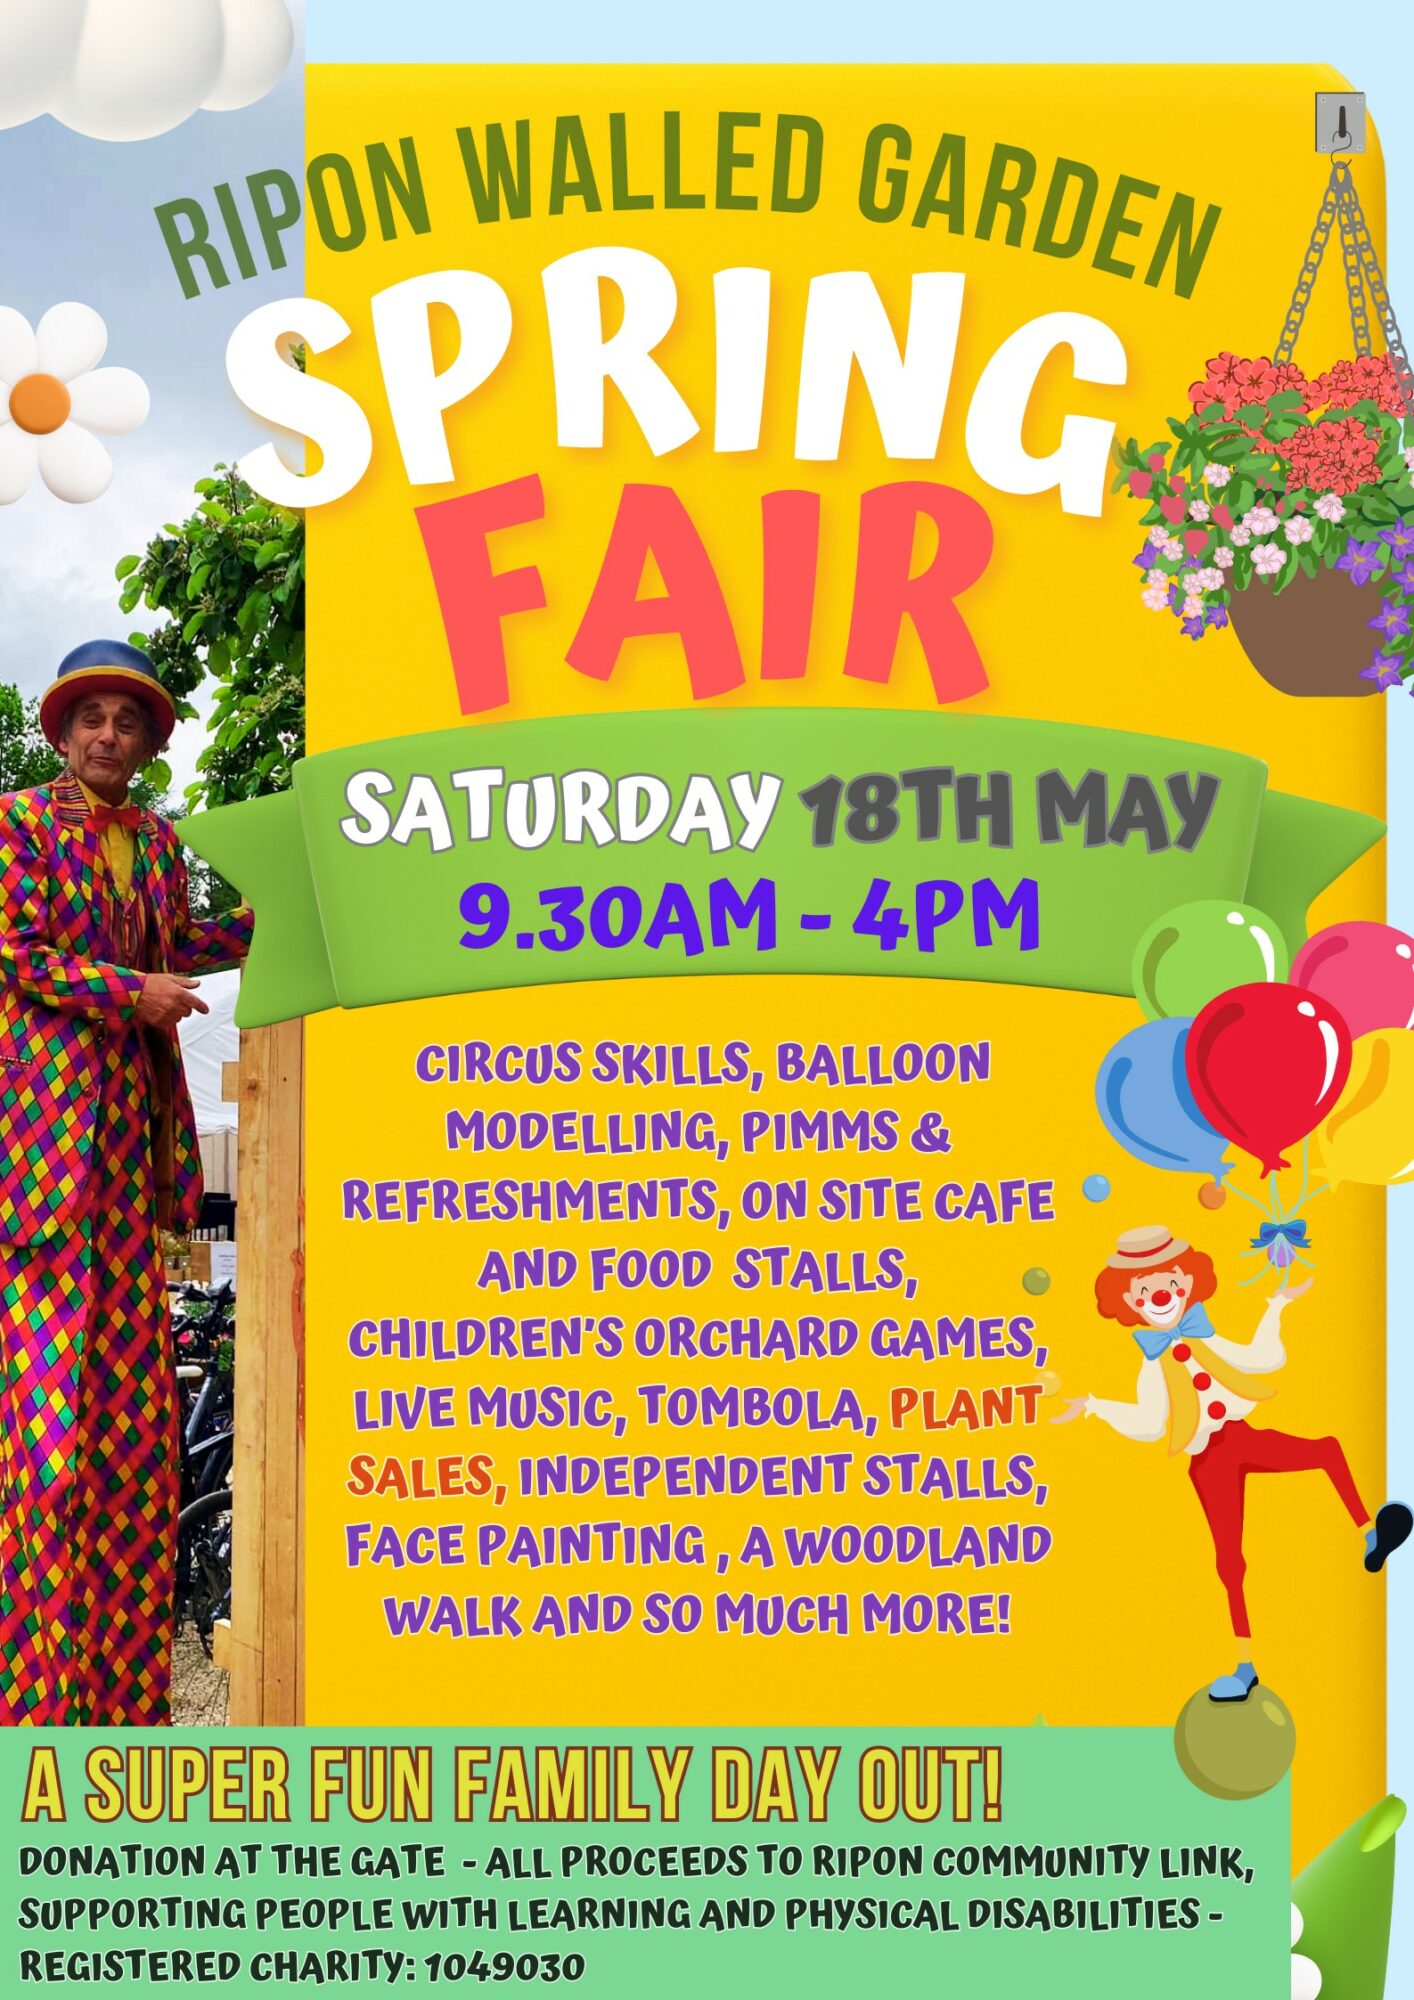 Image name spring fair poster final the 1 image from the post Spring Plant Fair in Yorkshire.com.